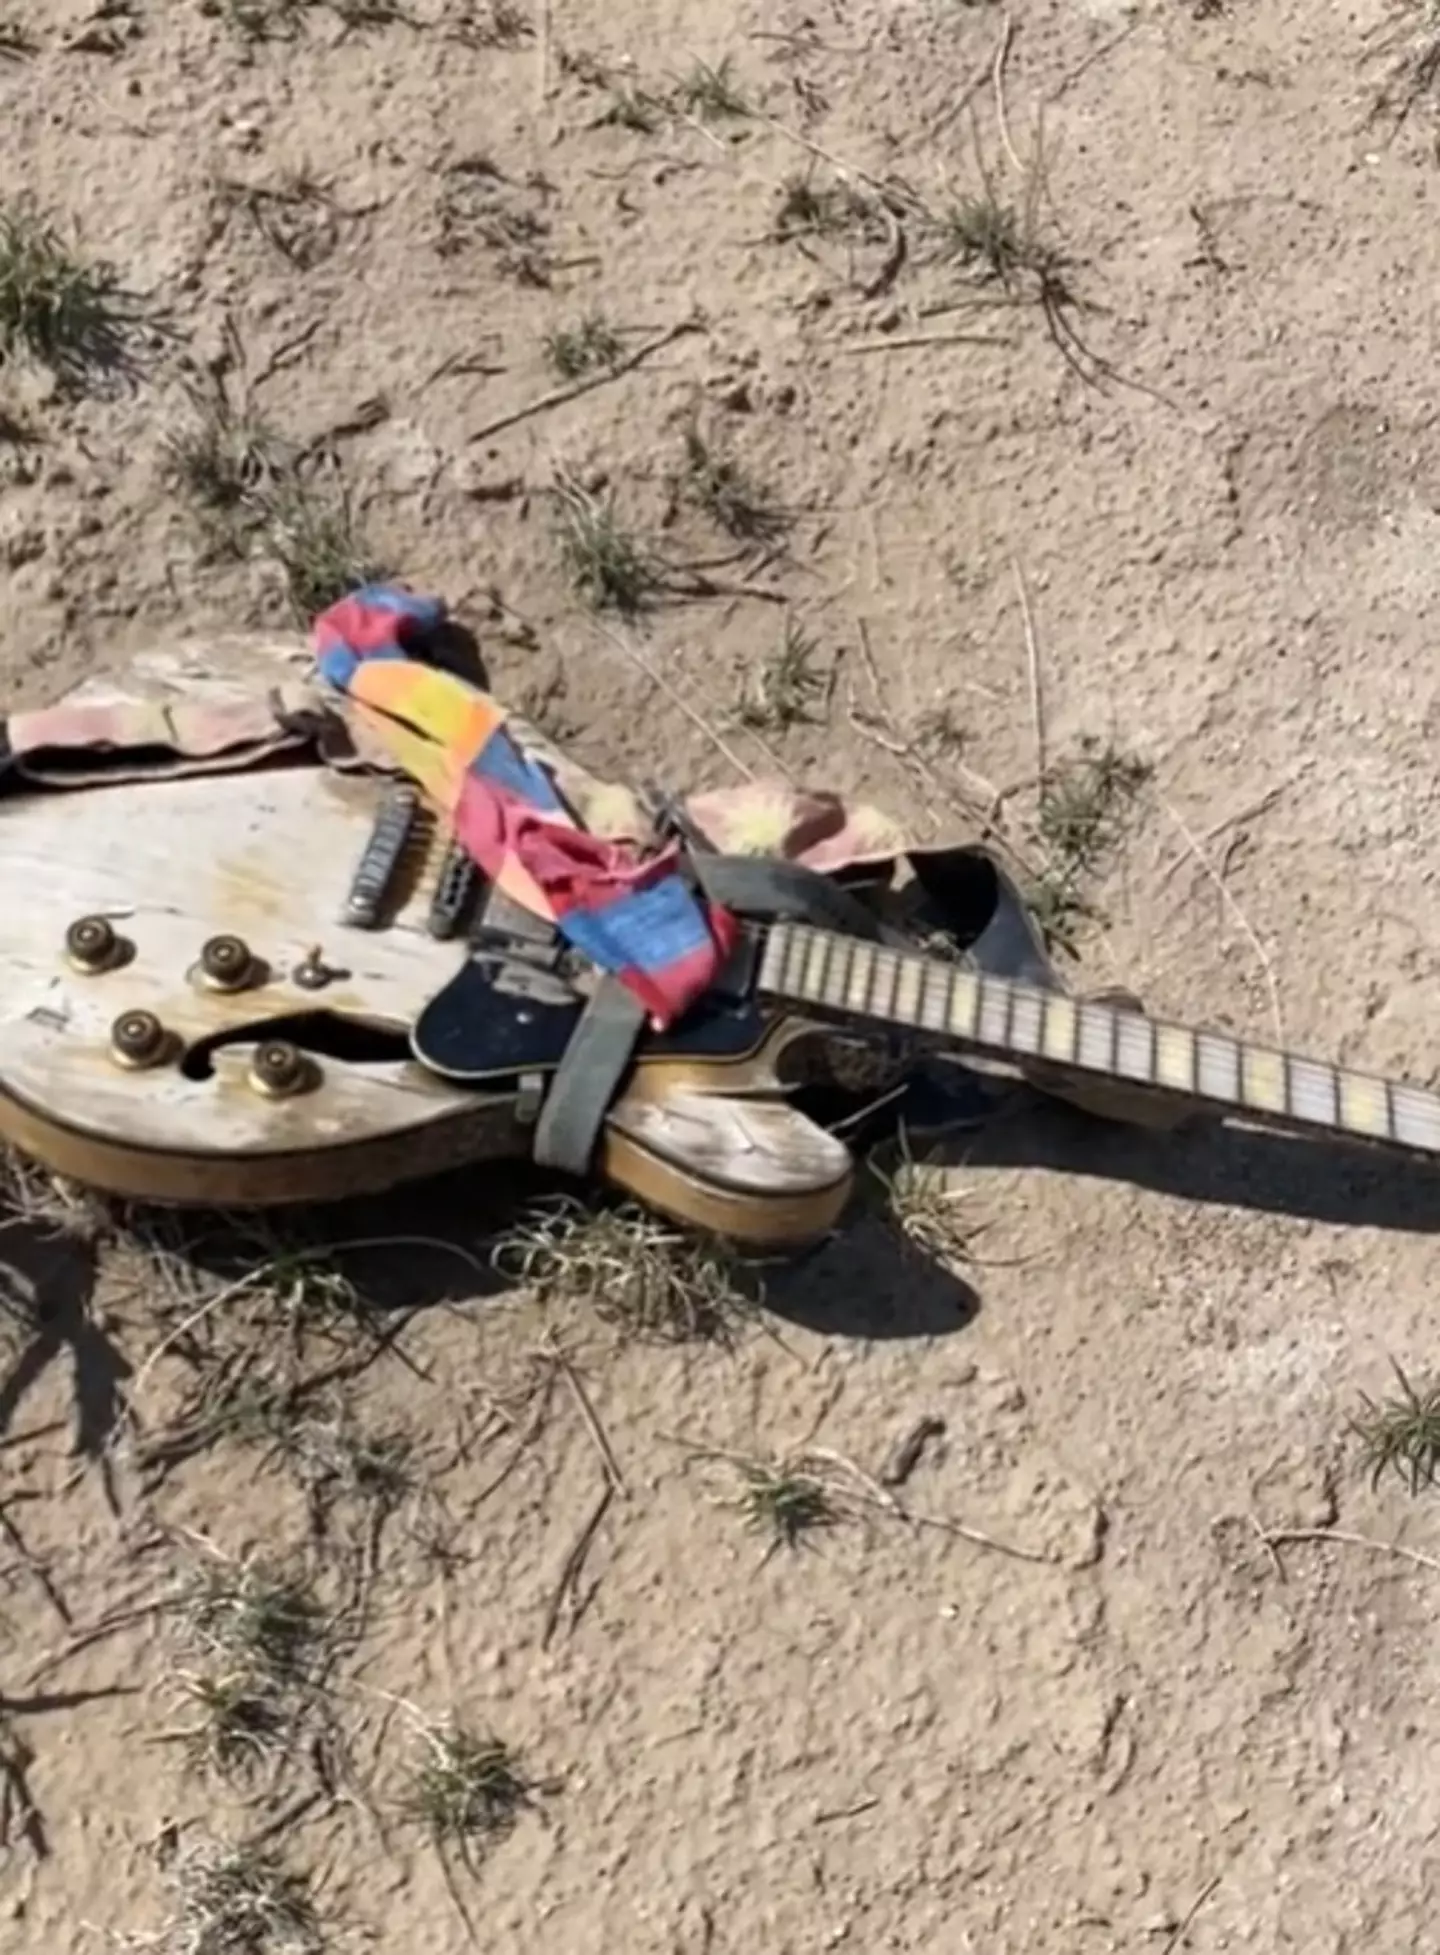 Ryan came across a discarded guitar in the desert.